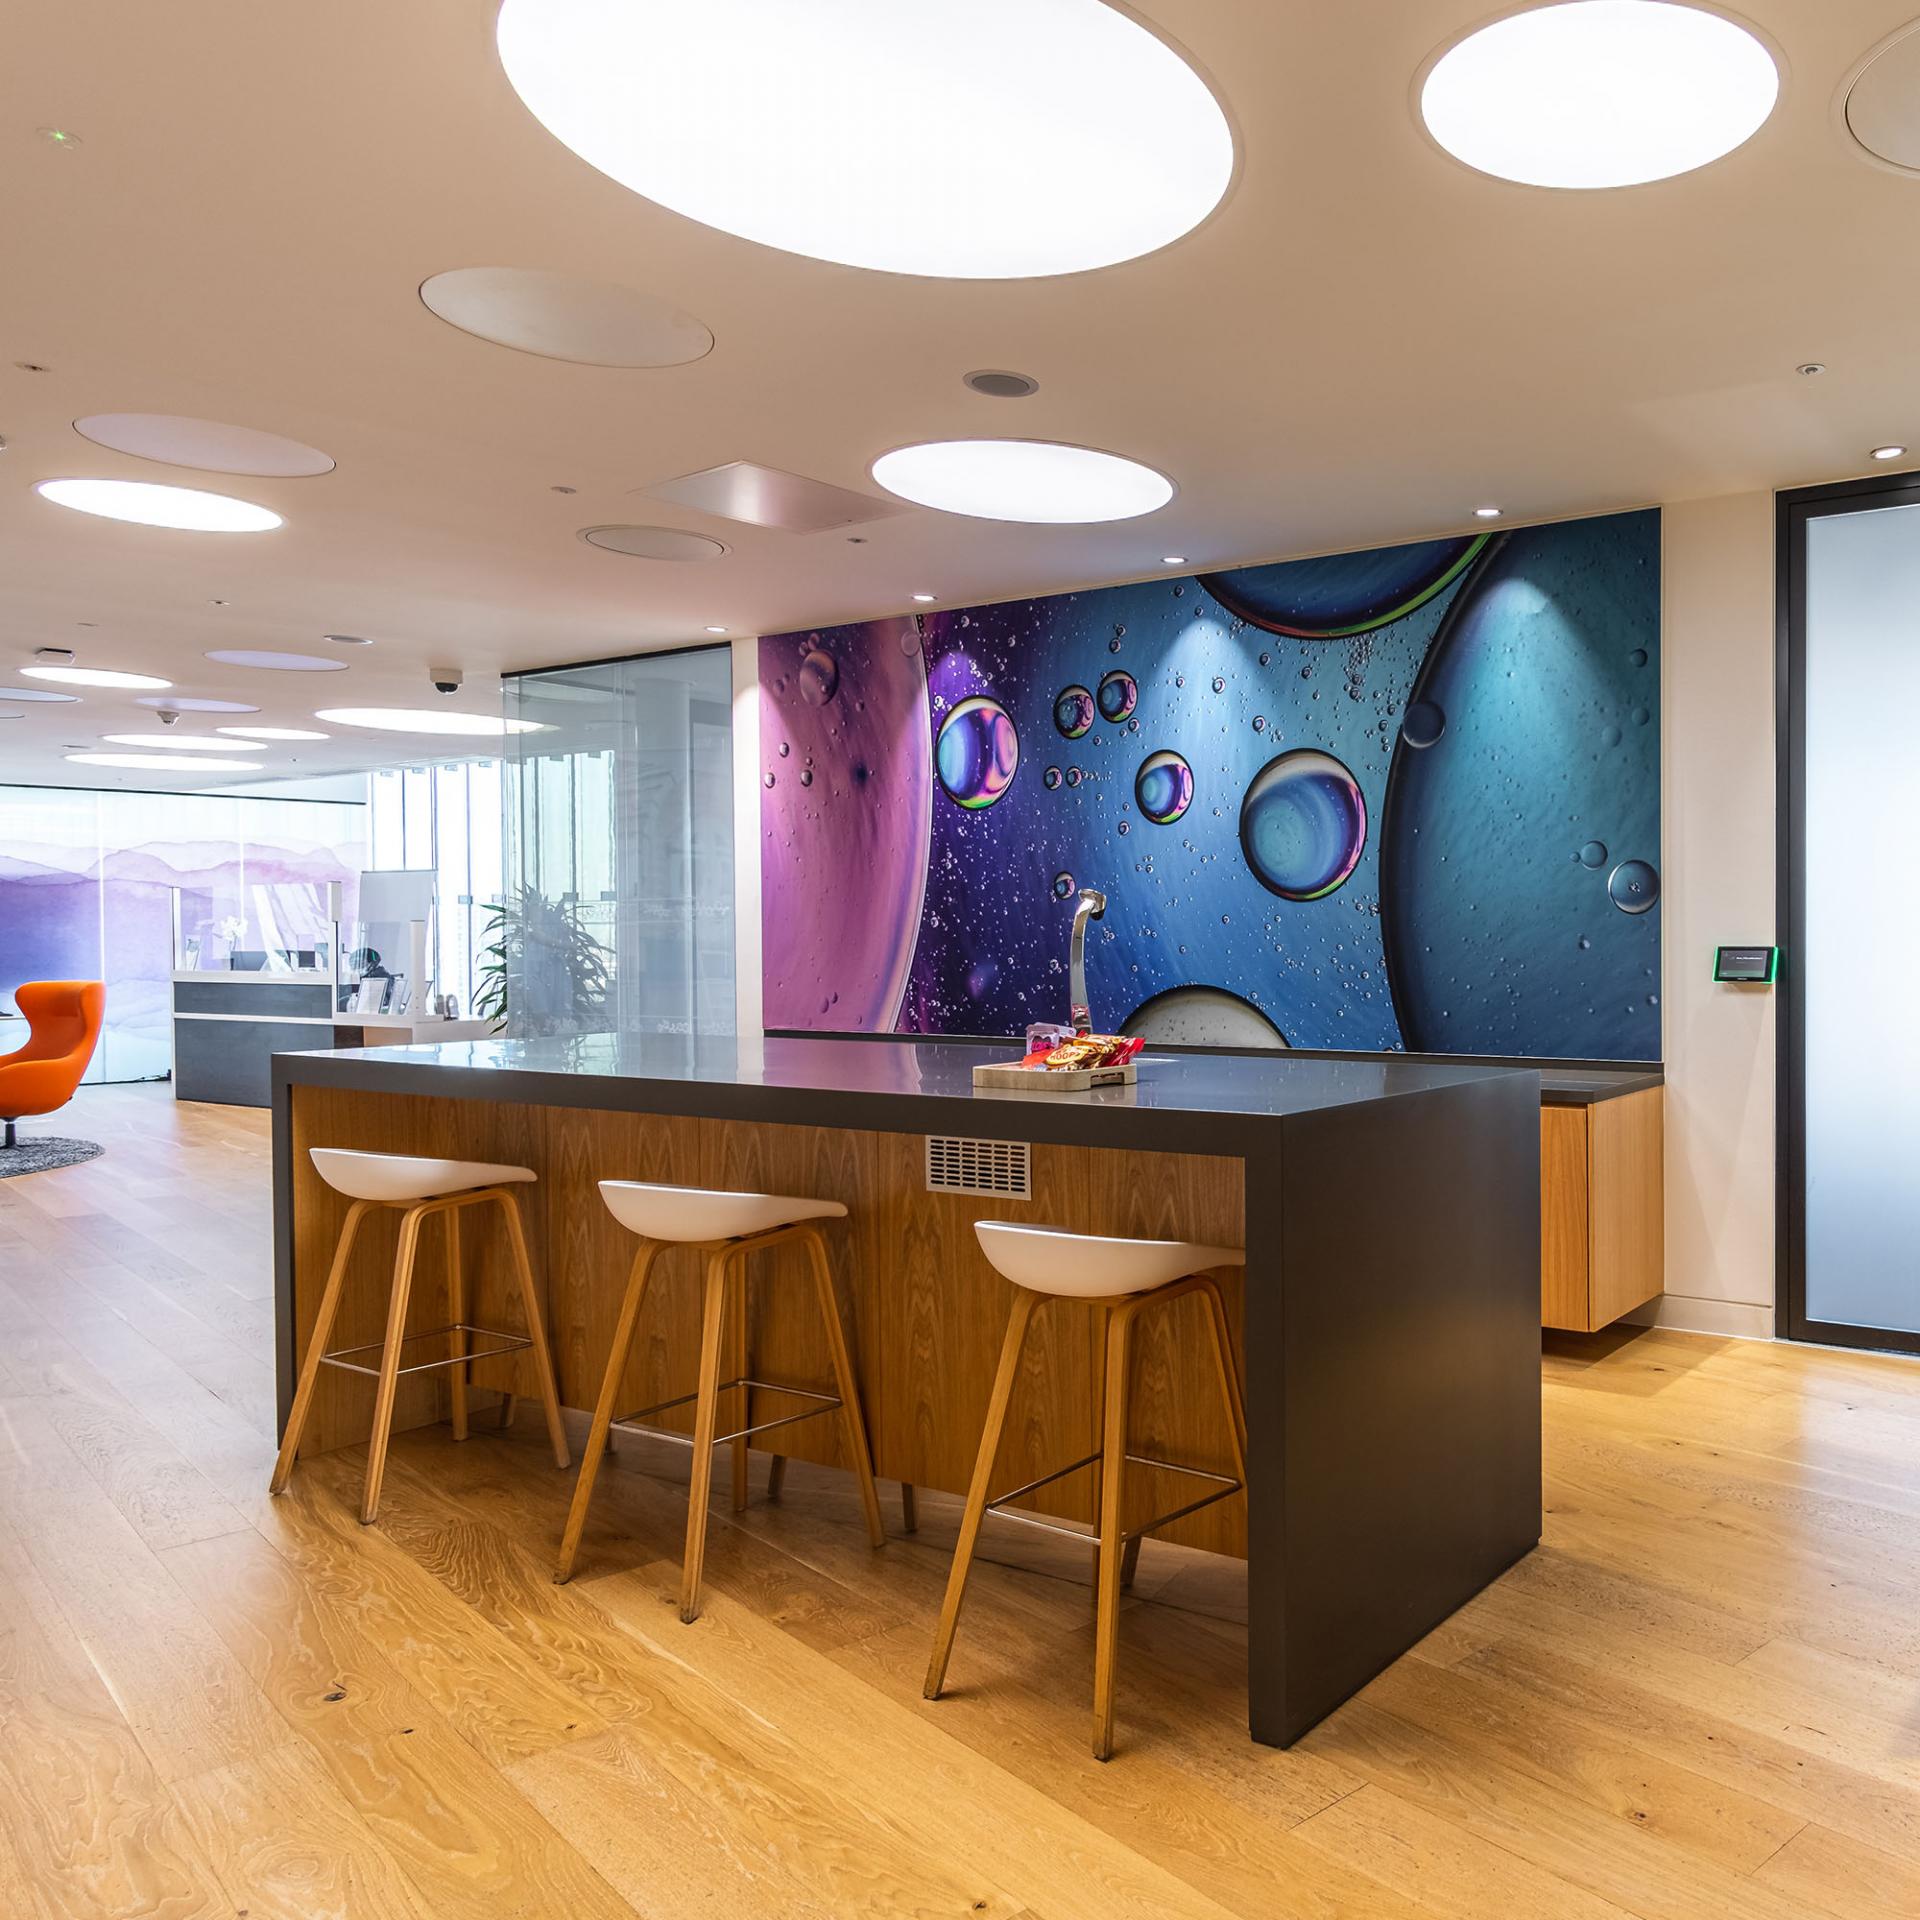 A gathering spot with a sink at the Vertex Pharmaceuticals international headquarters in London